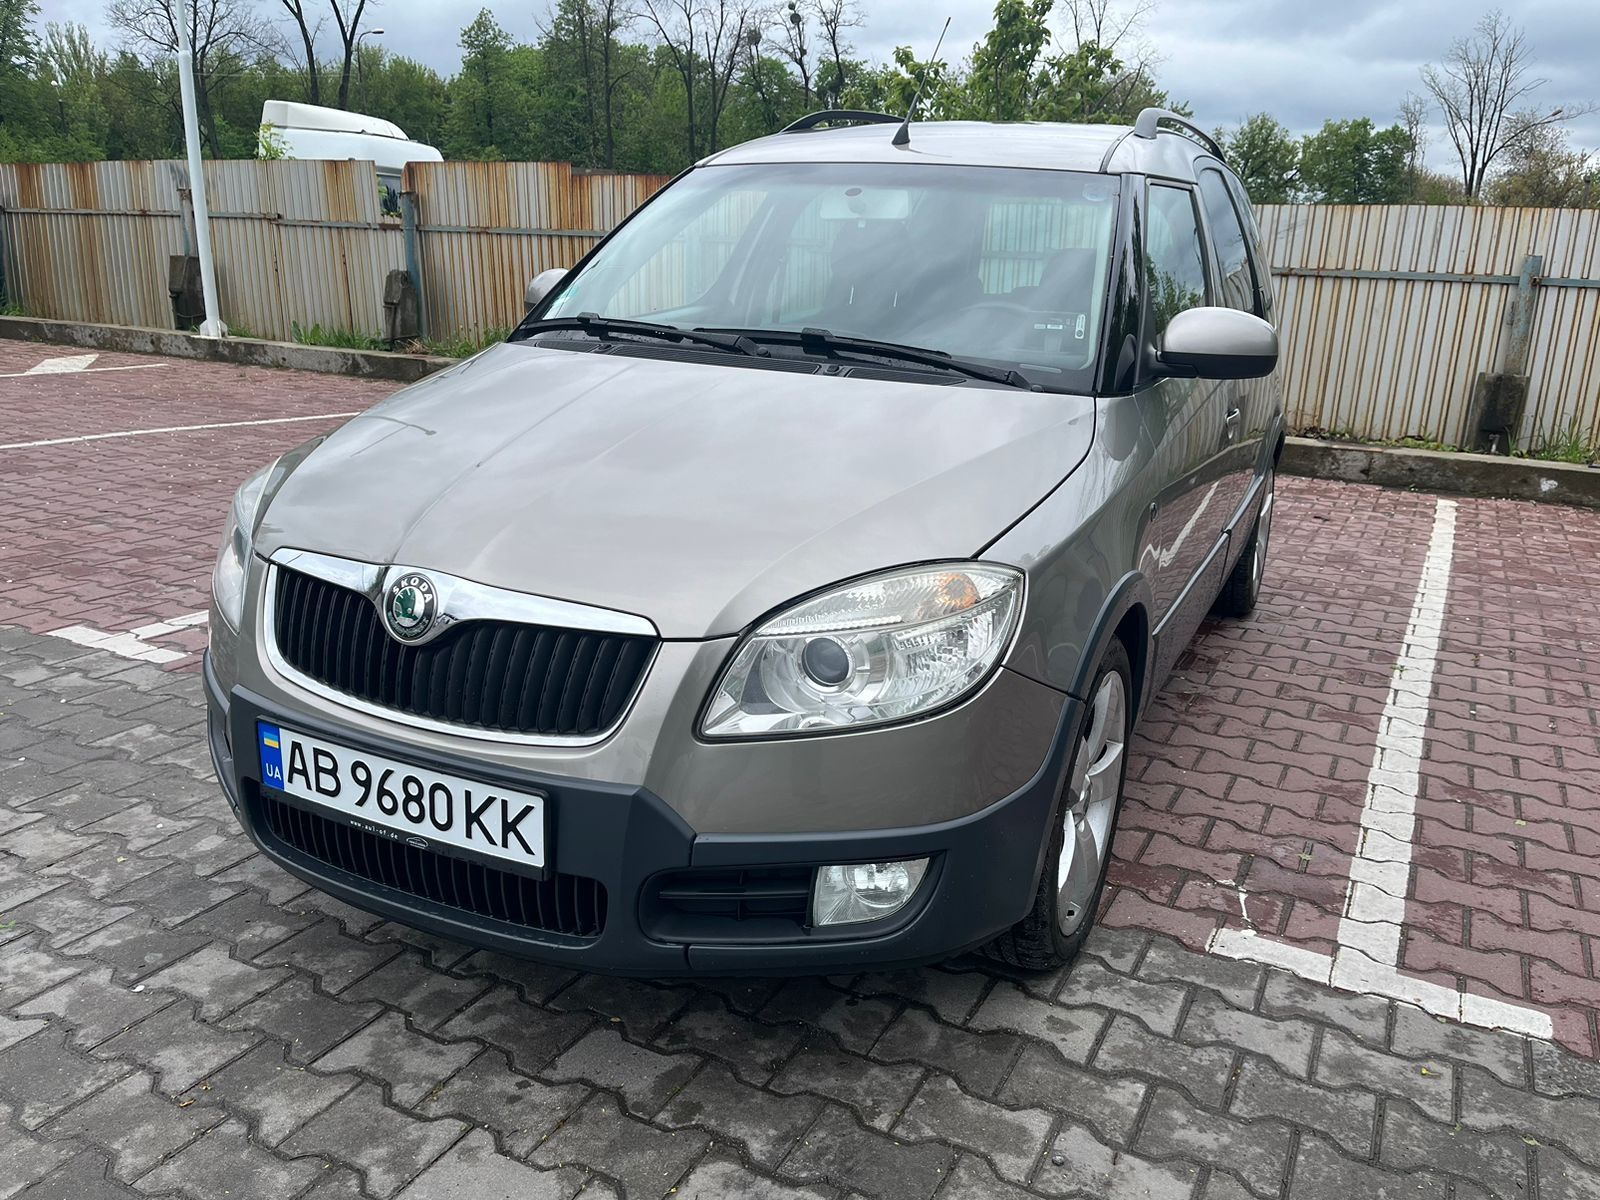 Skoda Roomster scout 1.6 automatic